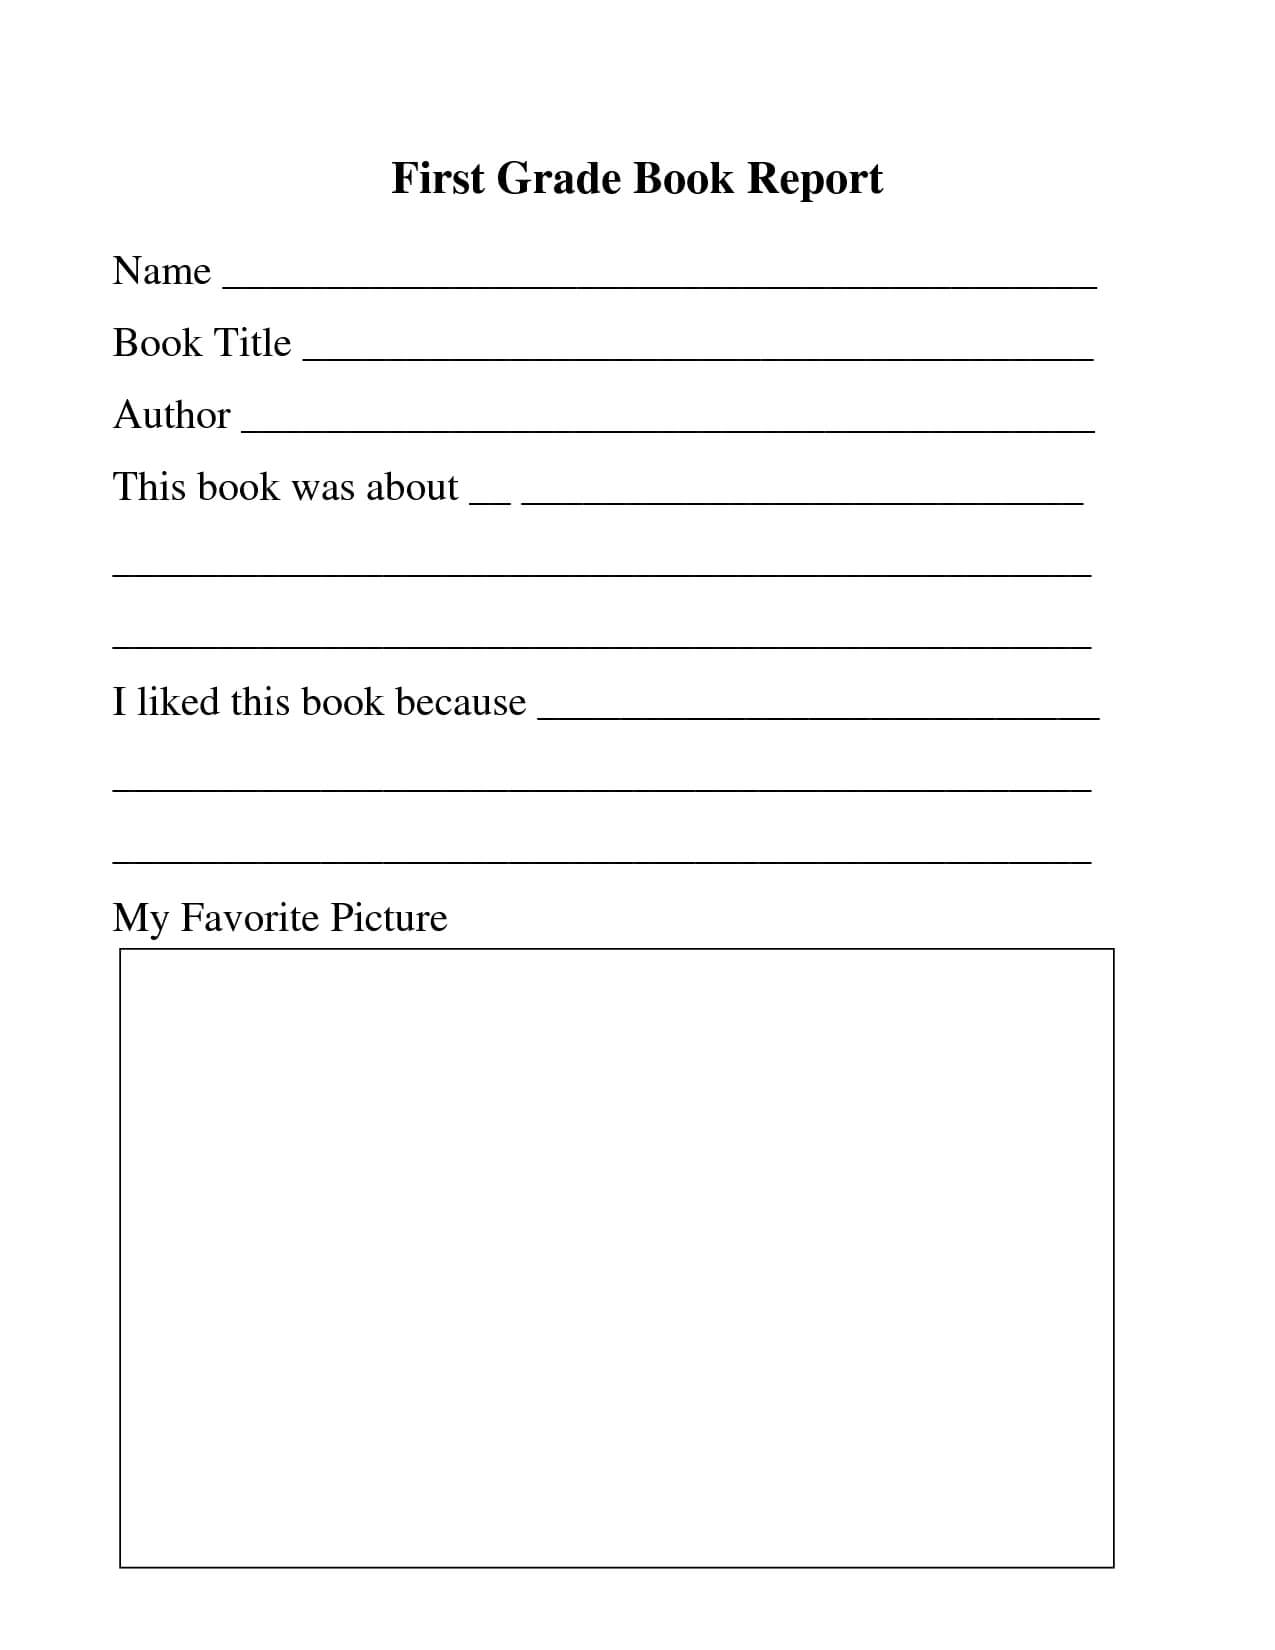 28 Images Of Template For First Grade List | Masorler Throughout 1St Grade Book Report Template